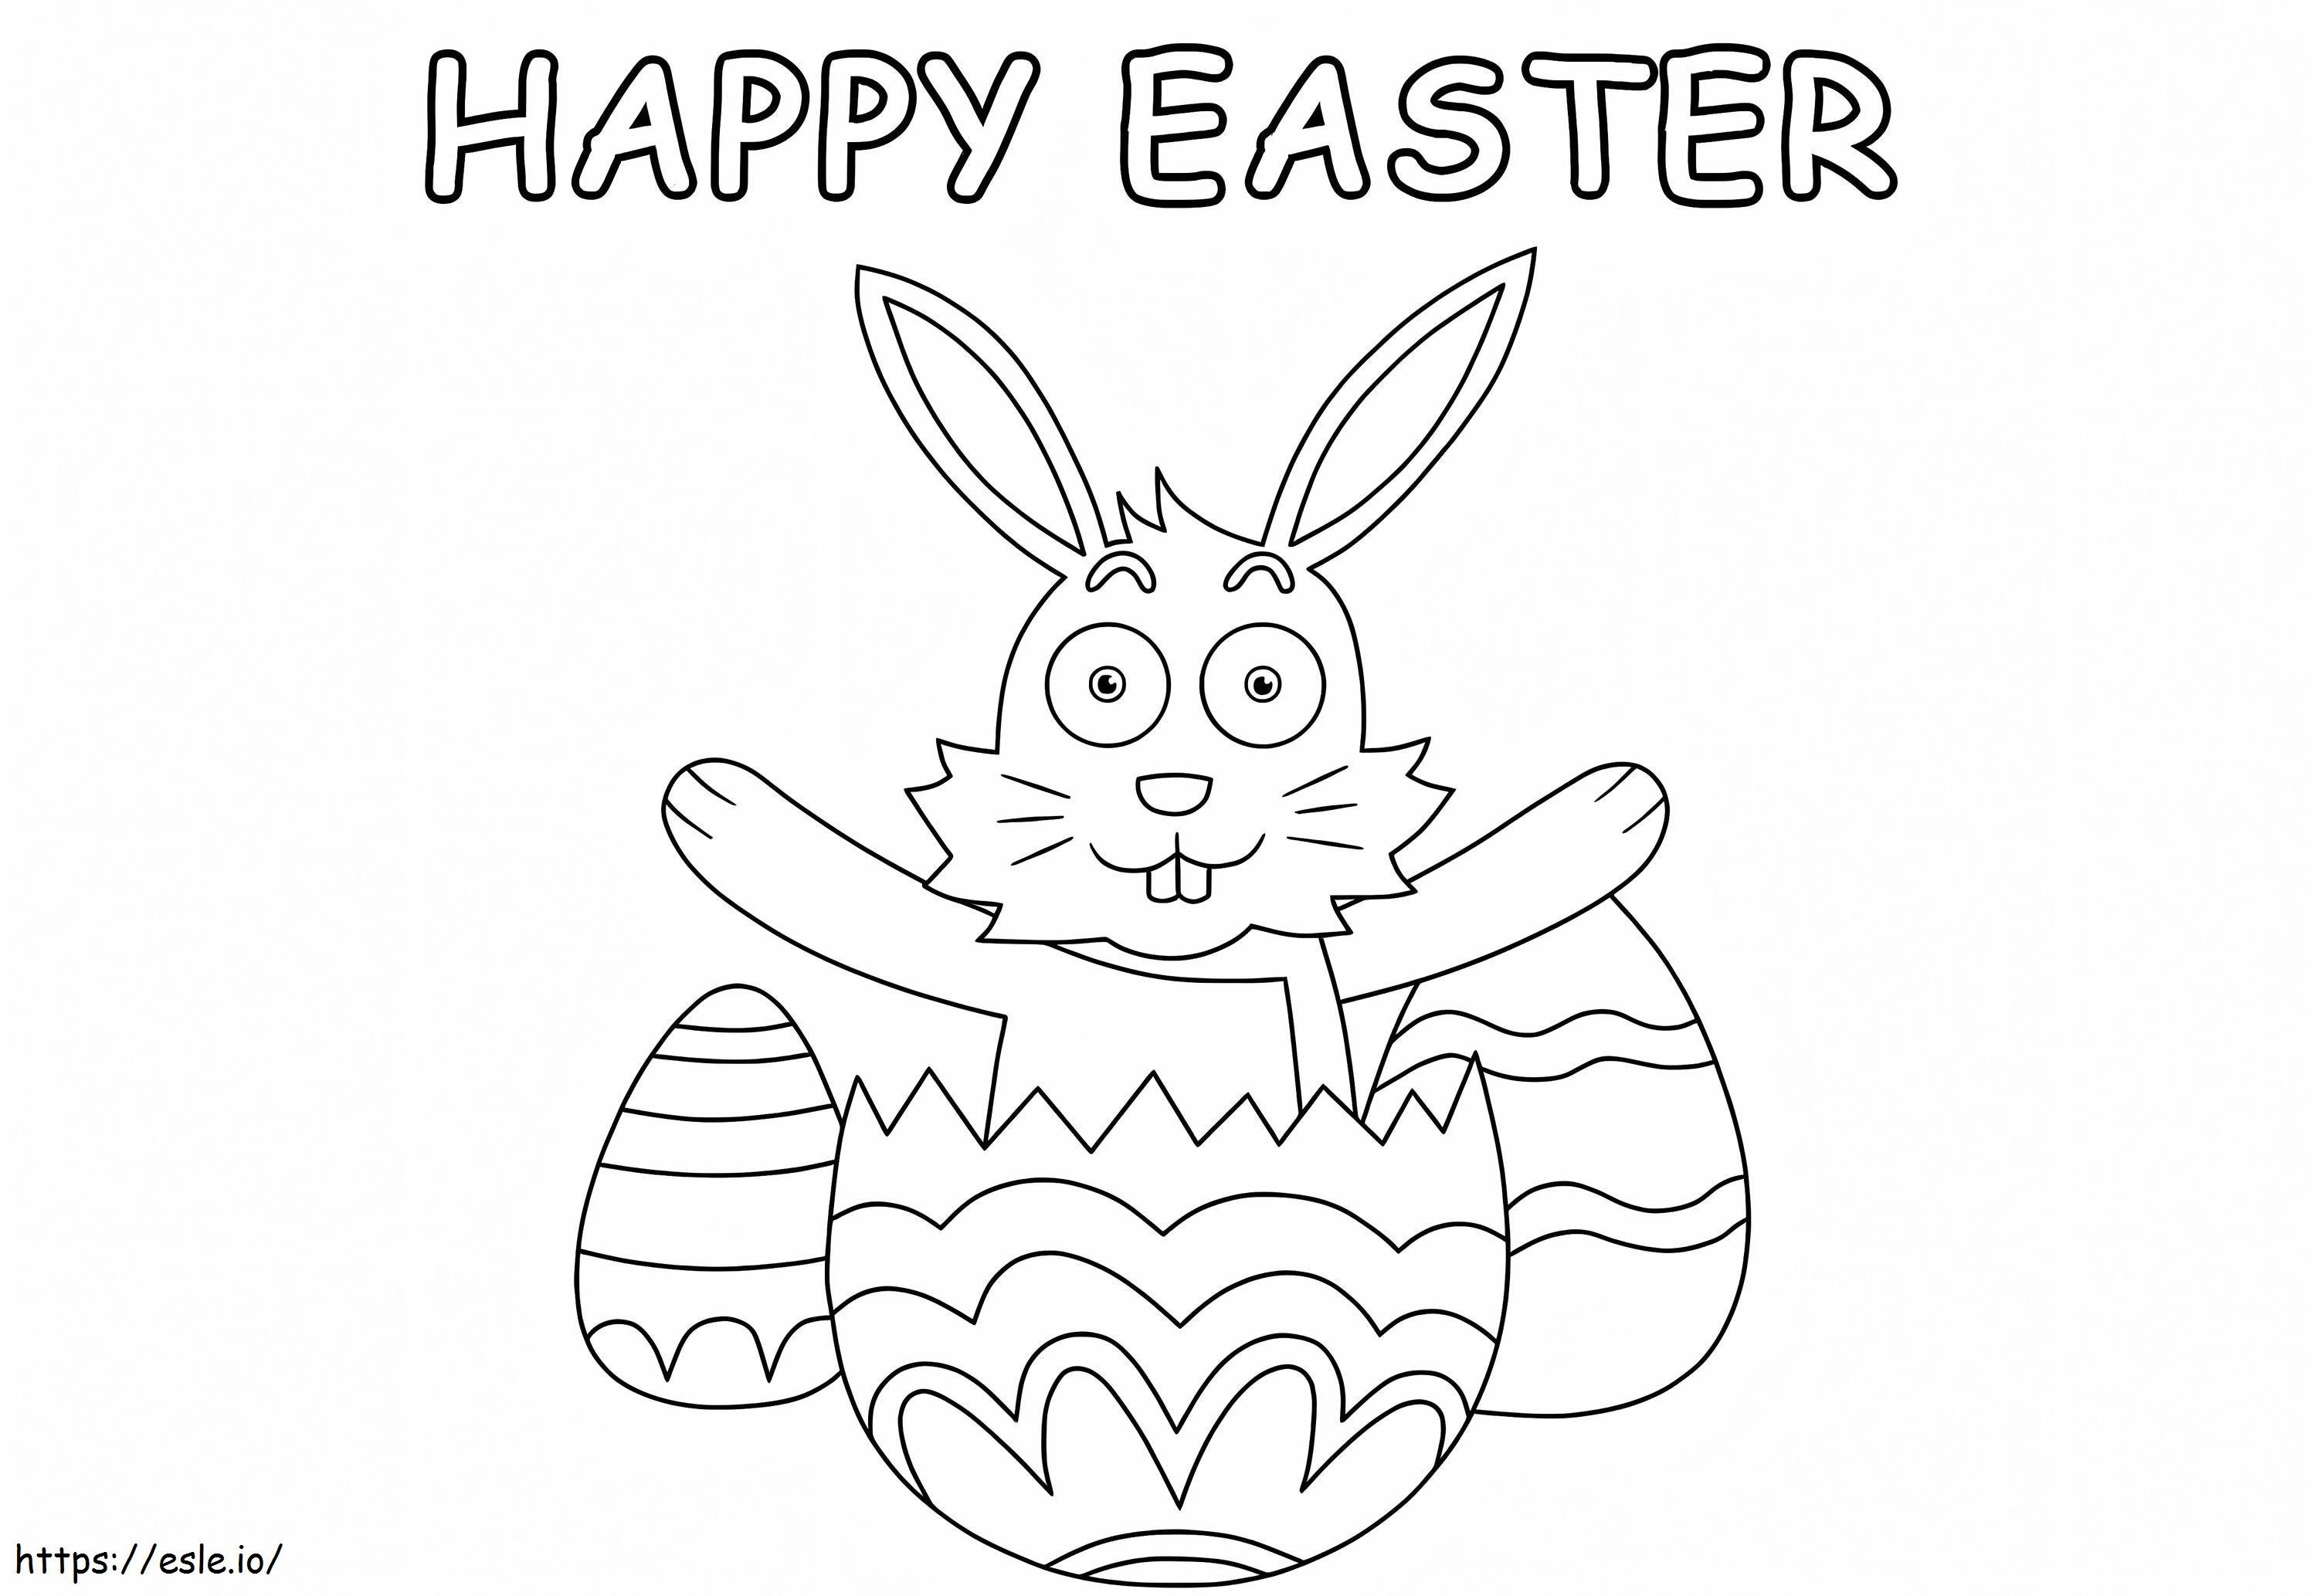 Happy Easter Bunny coloring page